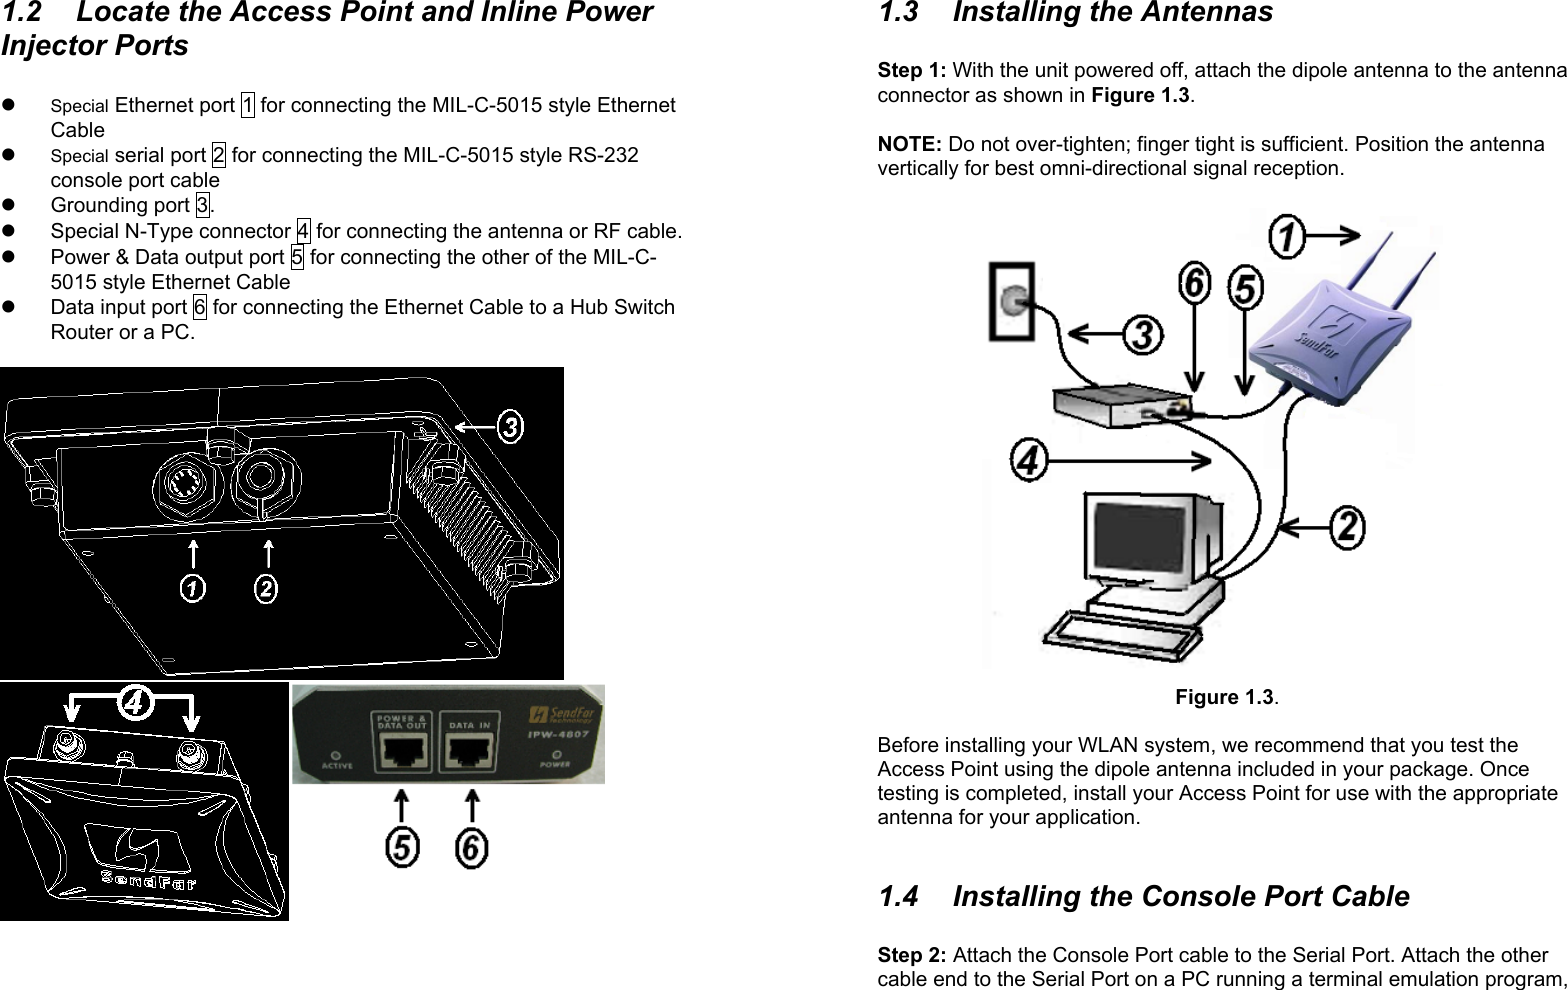 21.2  Locate the Access Point and Inline PowerInjector Portsz Special Ethernet port 1 for connecting the MIL-C-5015 style EthernetCablez Special serial port 2 for connecting the MIL-C-5015 style RS-232console port cablez Grounding port 3.z  Special N-Type connector 4 for connecting the antenna or RF cable.z  Power &amp; Data output port 5 for connecting the other of the MIL-C-5015 style Ethernet Cablez  Data input port 6 for connecting the Ethernet Cable to a Hub SwitchRouter or a PC.31.3  Installing the AntennasStep 1: With the unit powered off, attach the dipole antenna to the antennaconnector as shown in Figure 1.3.NOTE: Do not over-tighten; finger tight is sufficient. Position the antennavertically for best omni-directional signal reception.Figure 1.3.Before installing your WLAN system, we recommend that you test theAccess Point using the dipole antenna included in your package. Oncetesting is completed, install your Access Point for use with the appropriateantenna for your application.1.4  Installing the Console Port CableStep 2: Attach the Console Port cable to the Serial Port. Attach the othercable end to the Serial Port on a PC running a terminal emulation program,